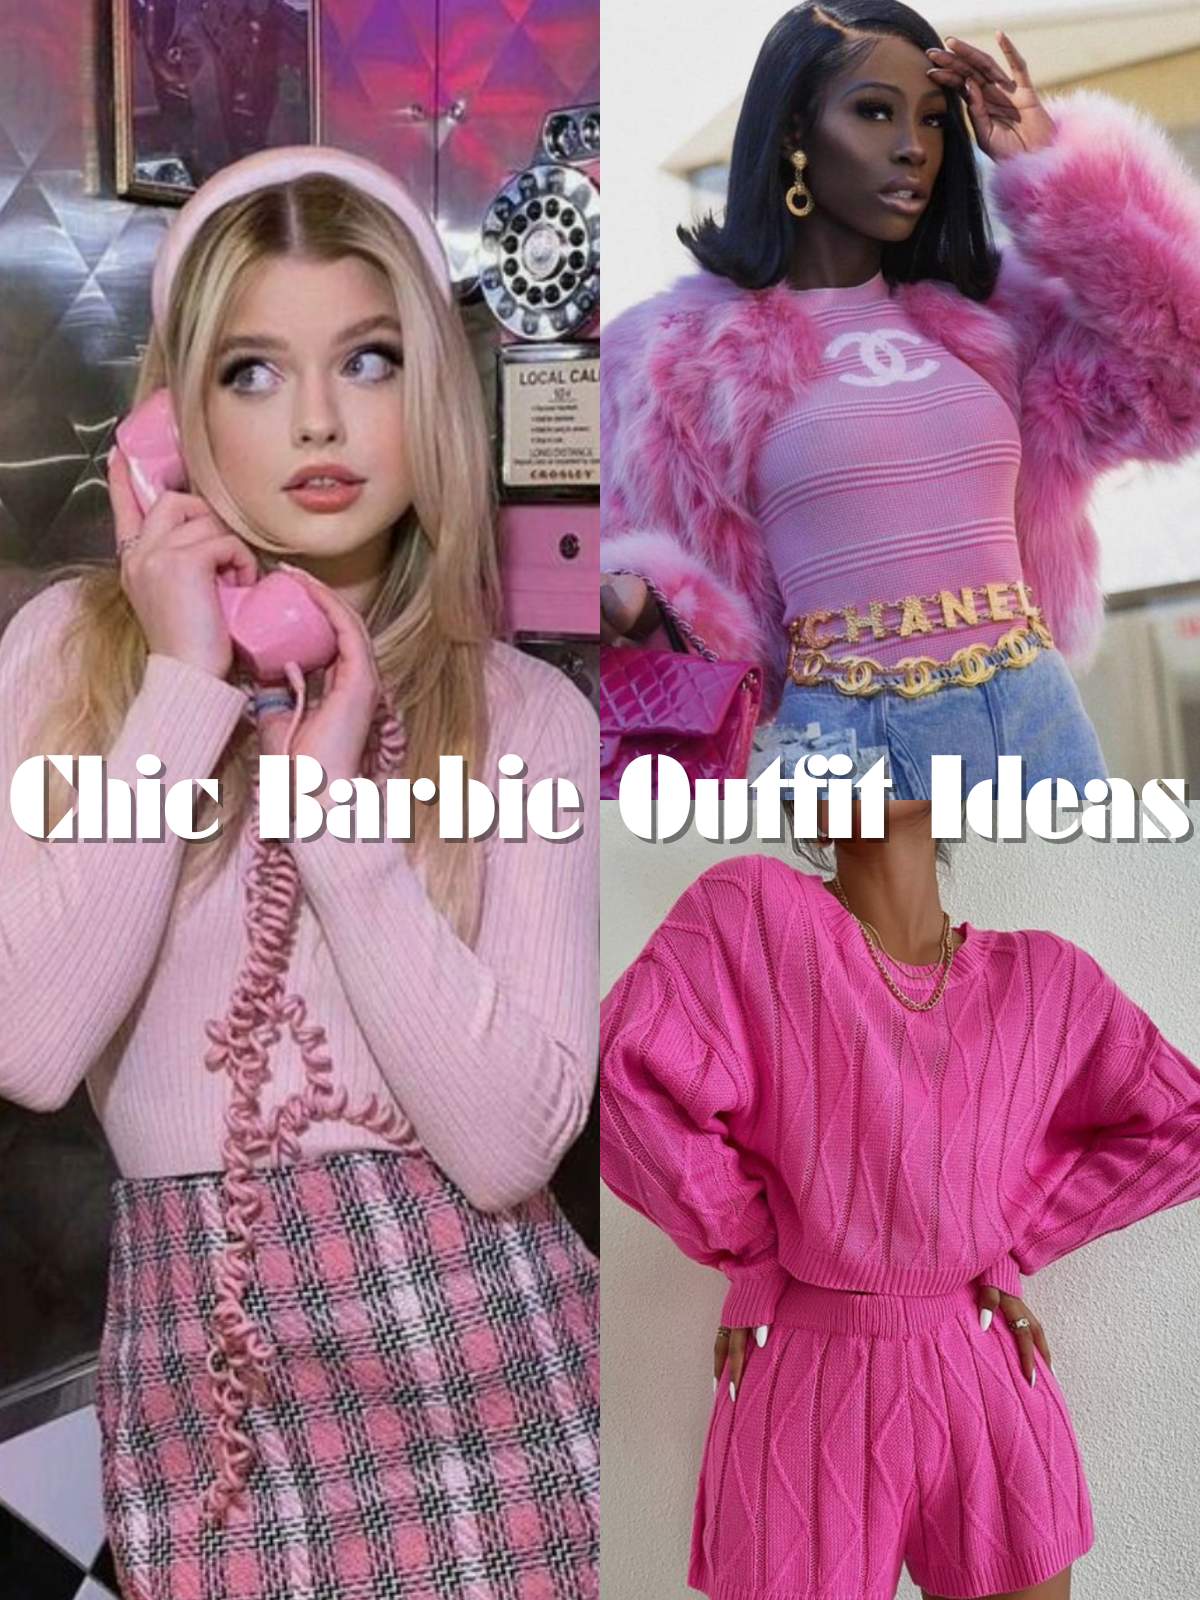 Chic Pink outfit ideas, 3 different examples.